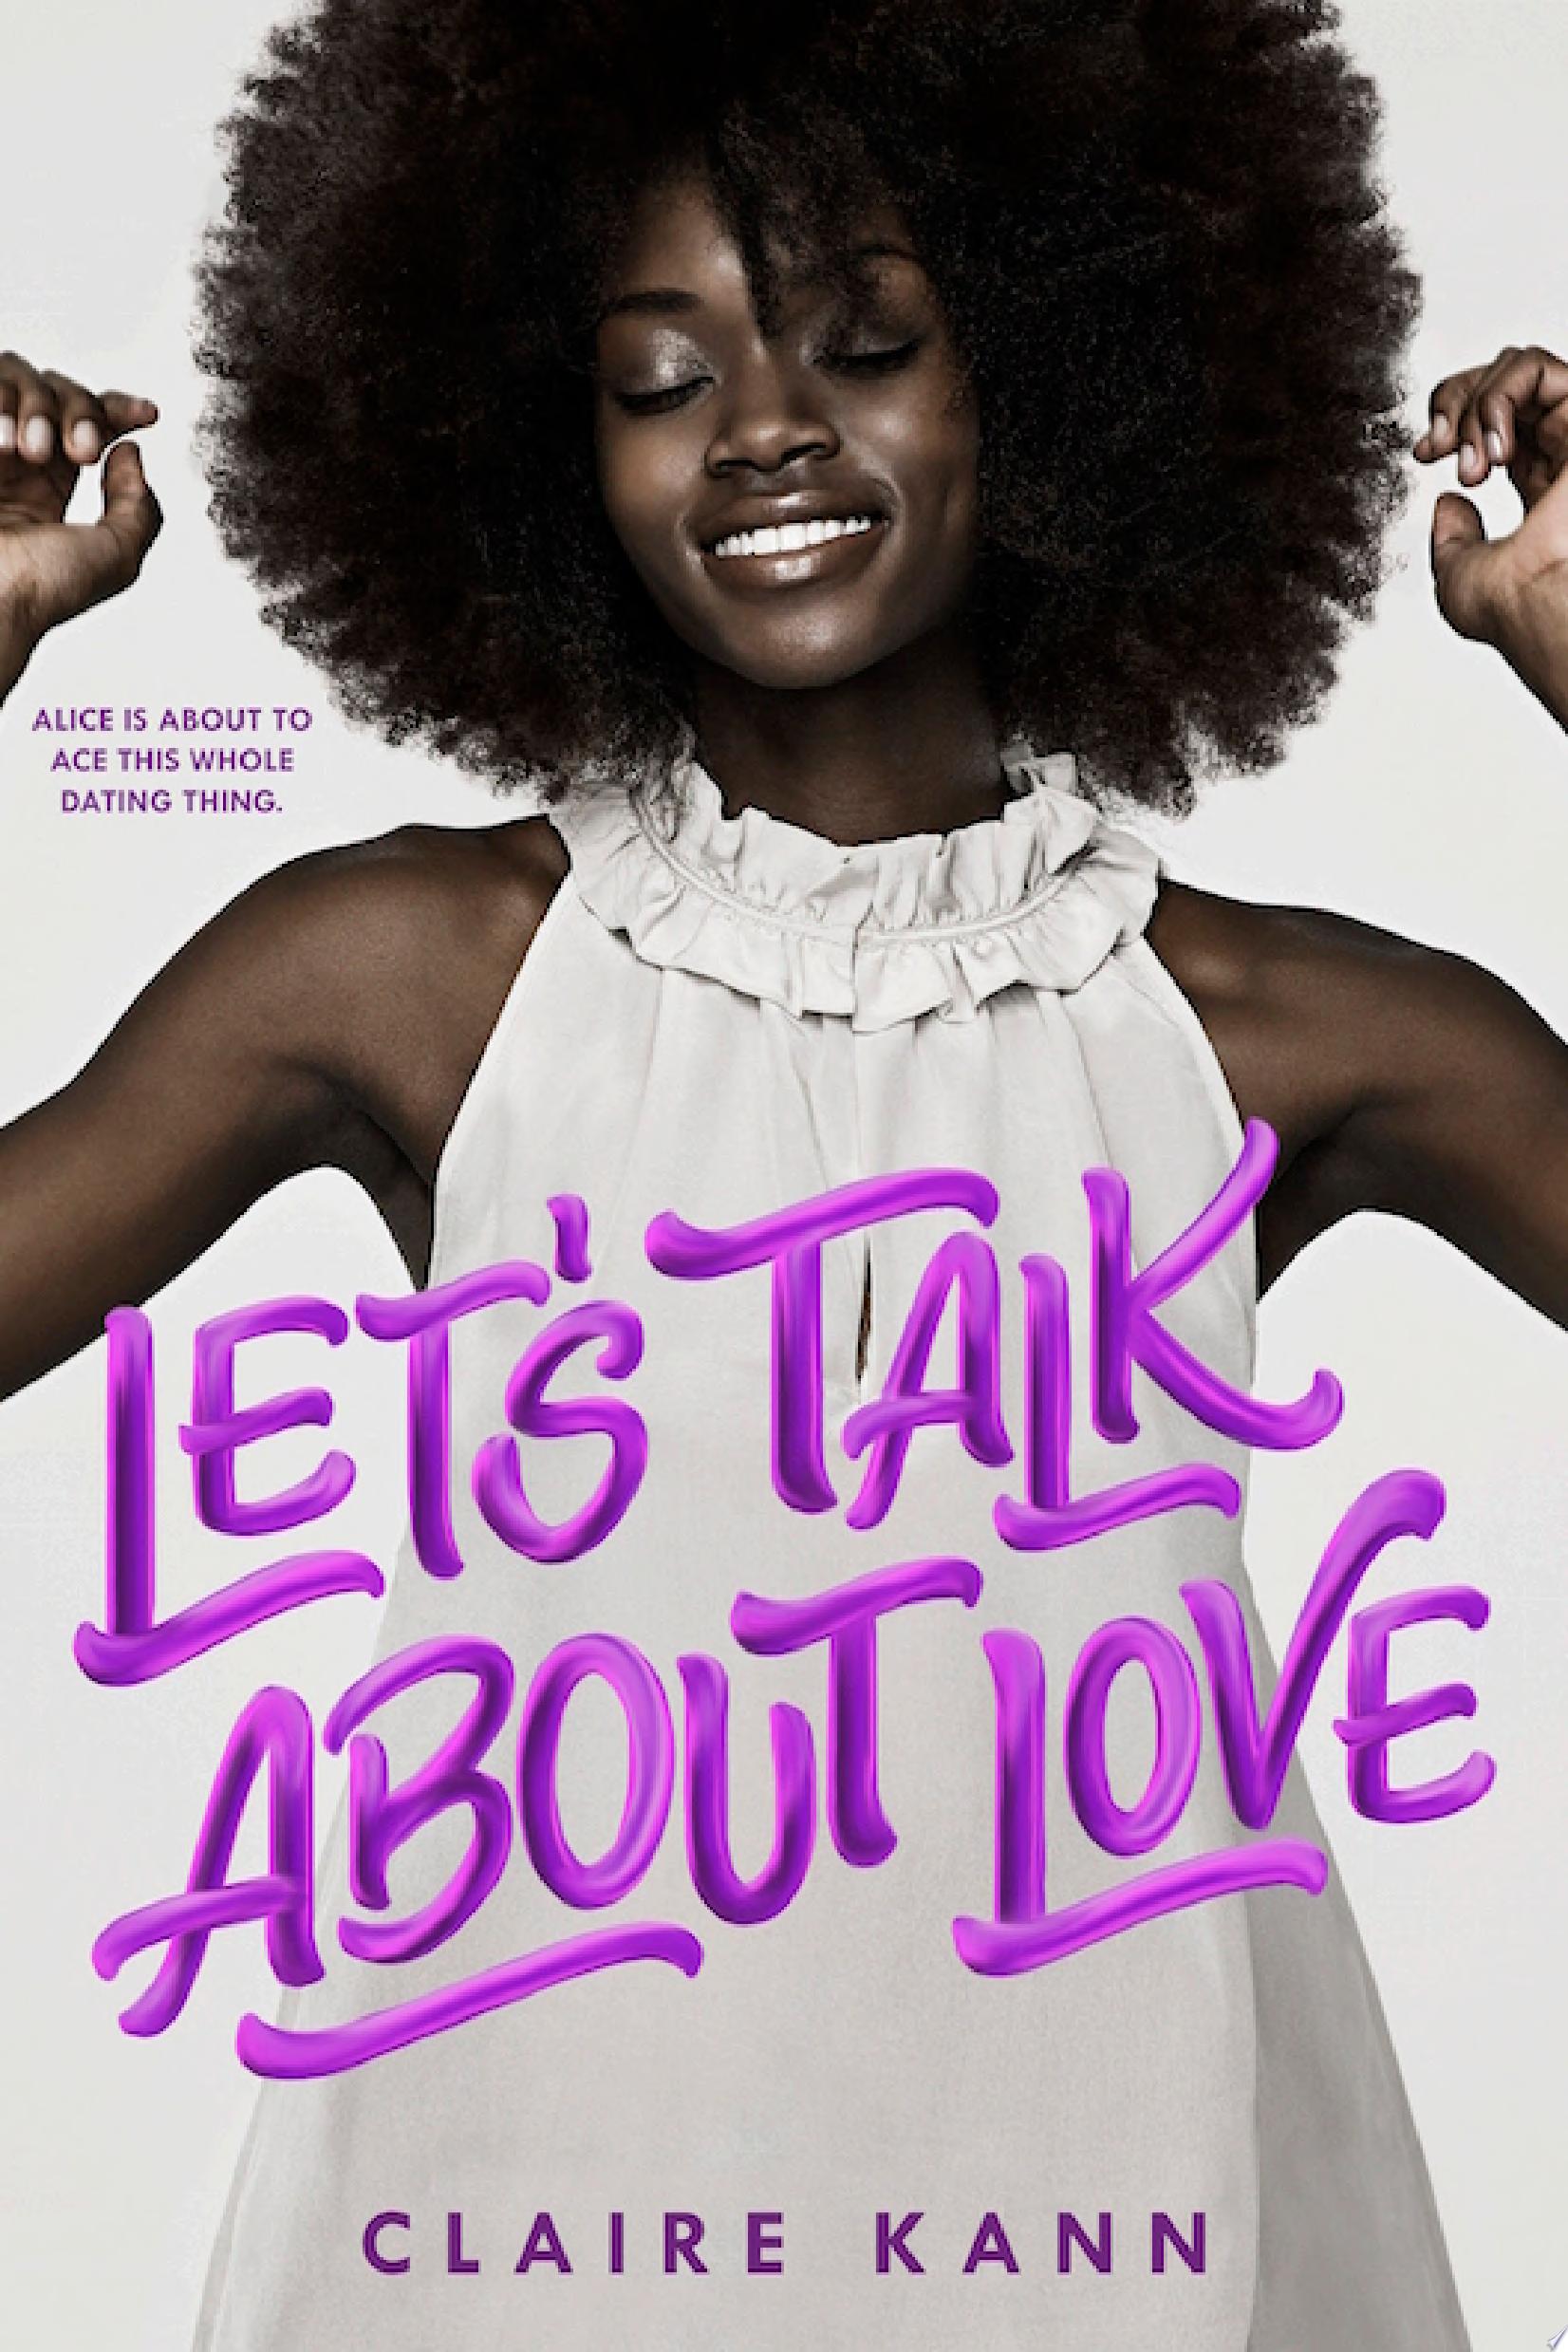 Image for "Let's Talk About Love"